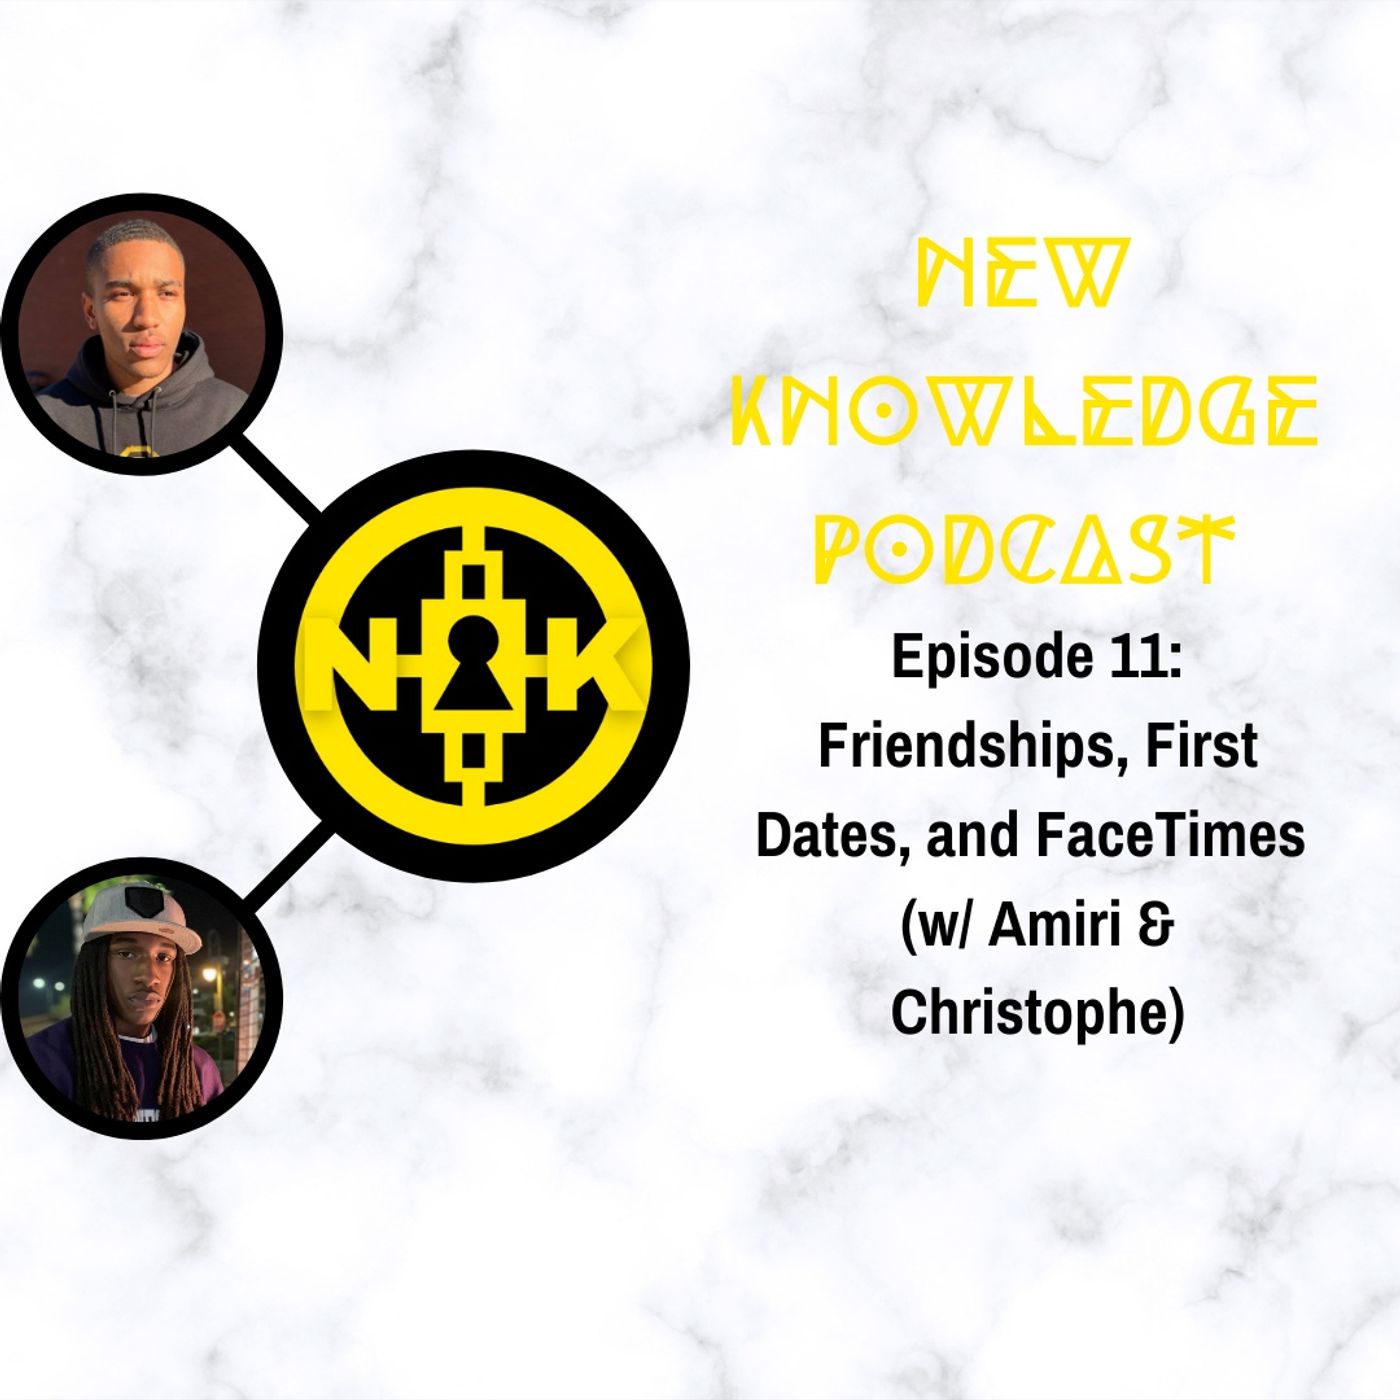 Episode 11: Friendships, First Dates, and FaceTimes